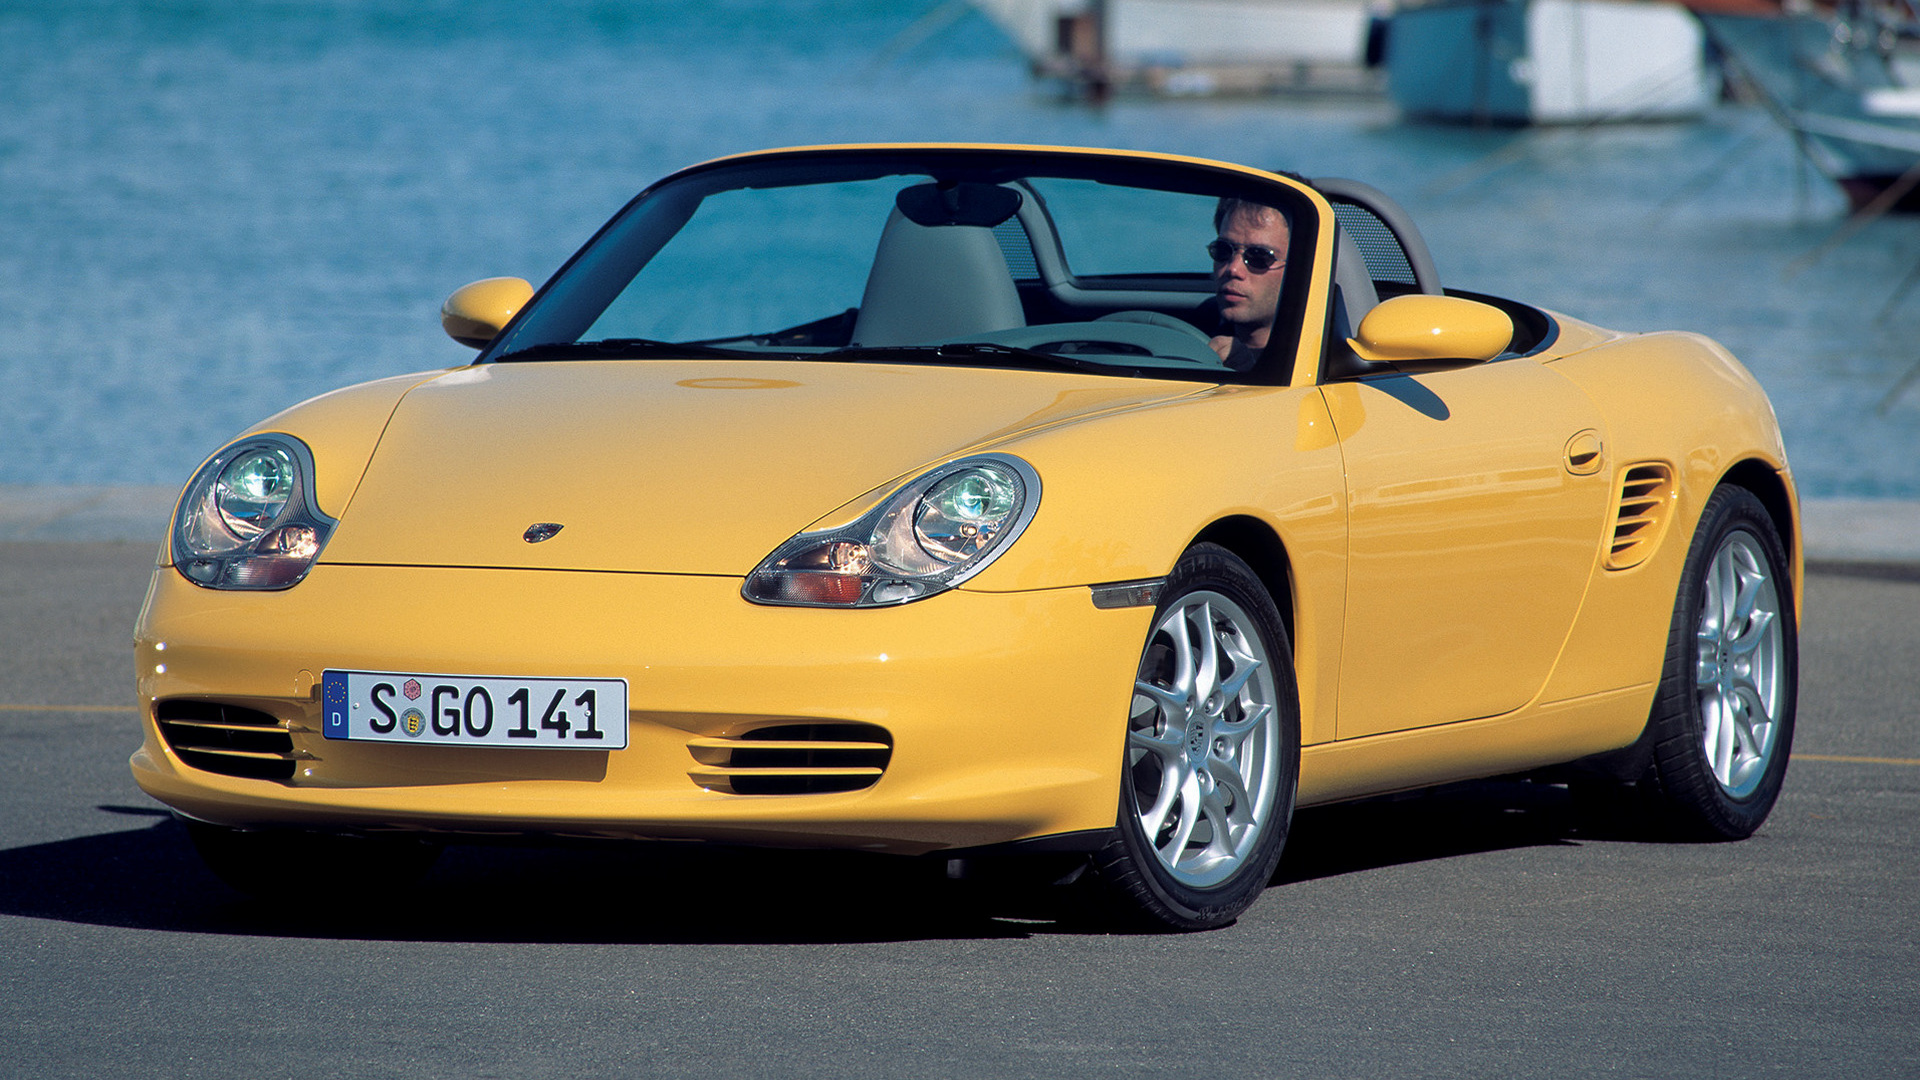 Porsche Boxster Wallpapers - Rev Up Your Screens with Stunning Car ...